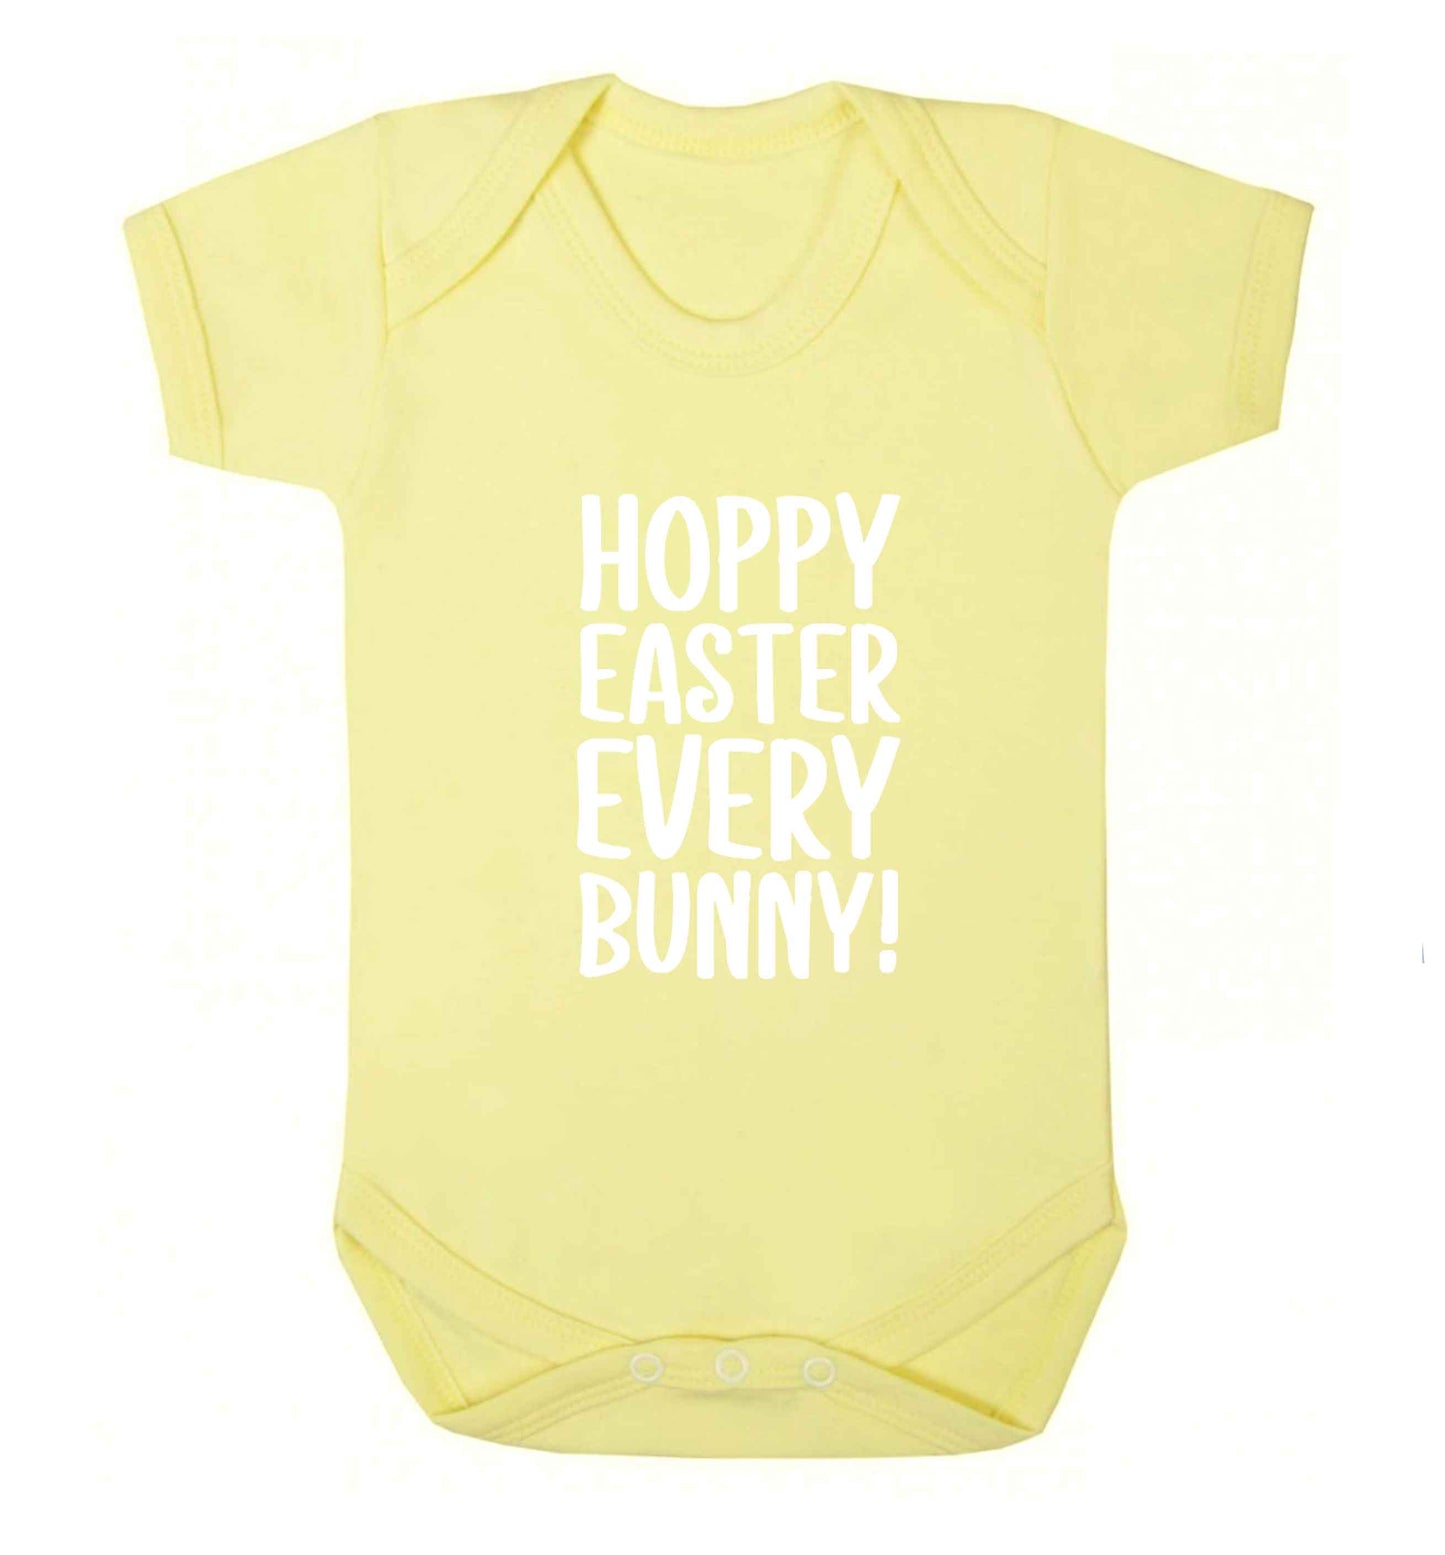 Hoppy Easter every bunny! baby vest pale yellow 18-24 months